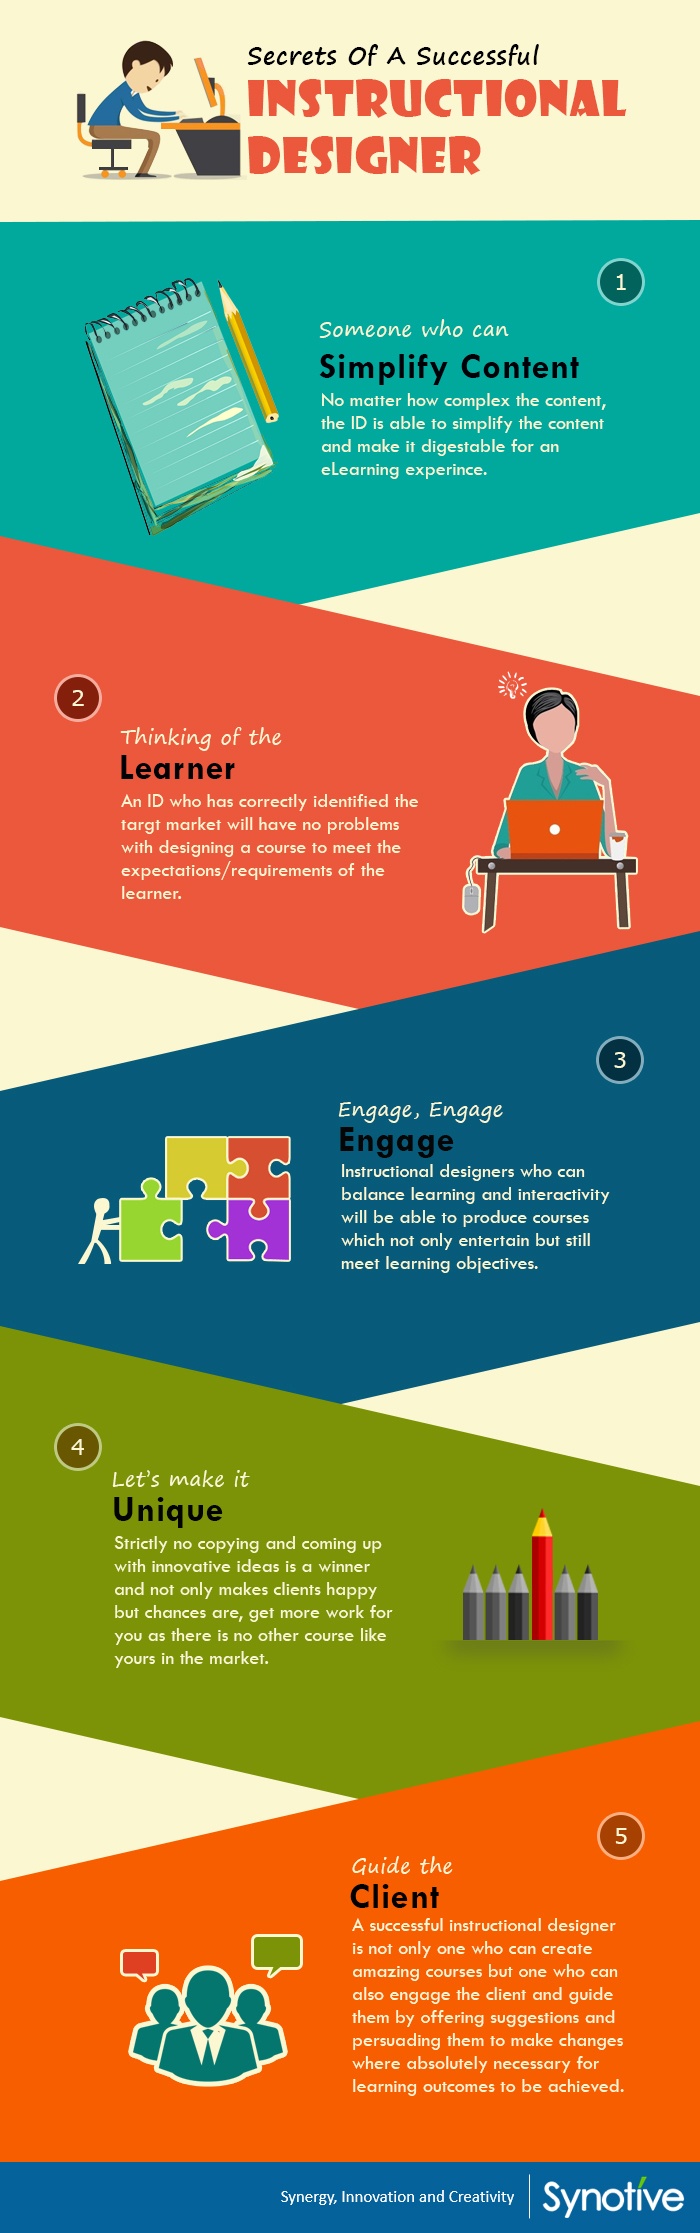 10 Creative Infographic Design Ideas to Inspire You | Lucidpress